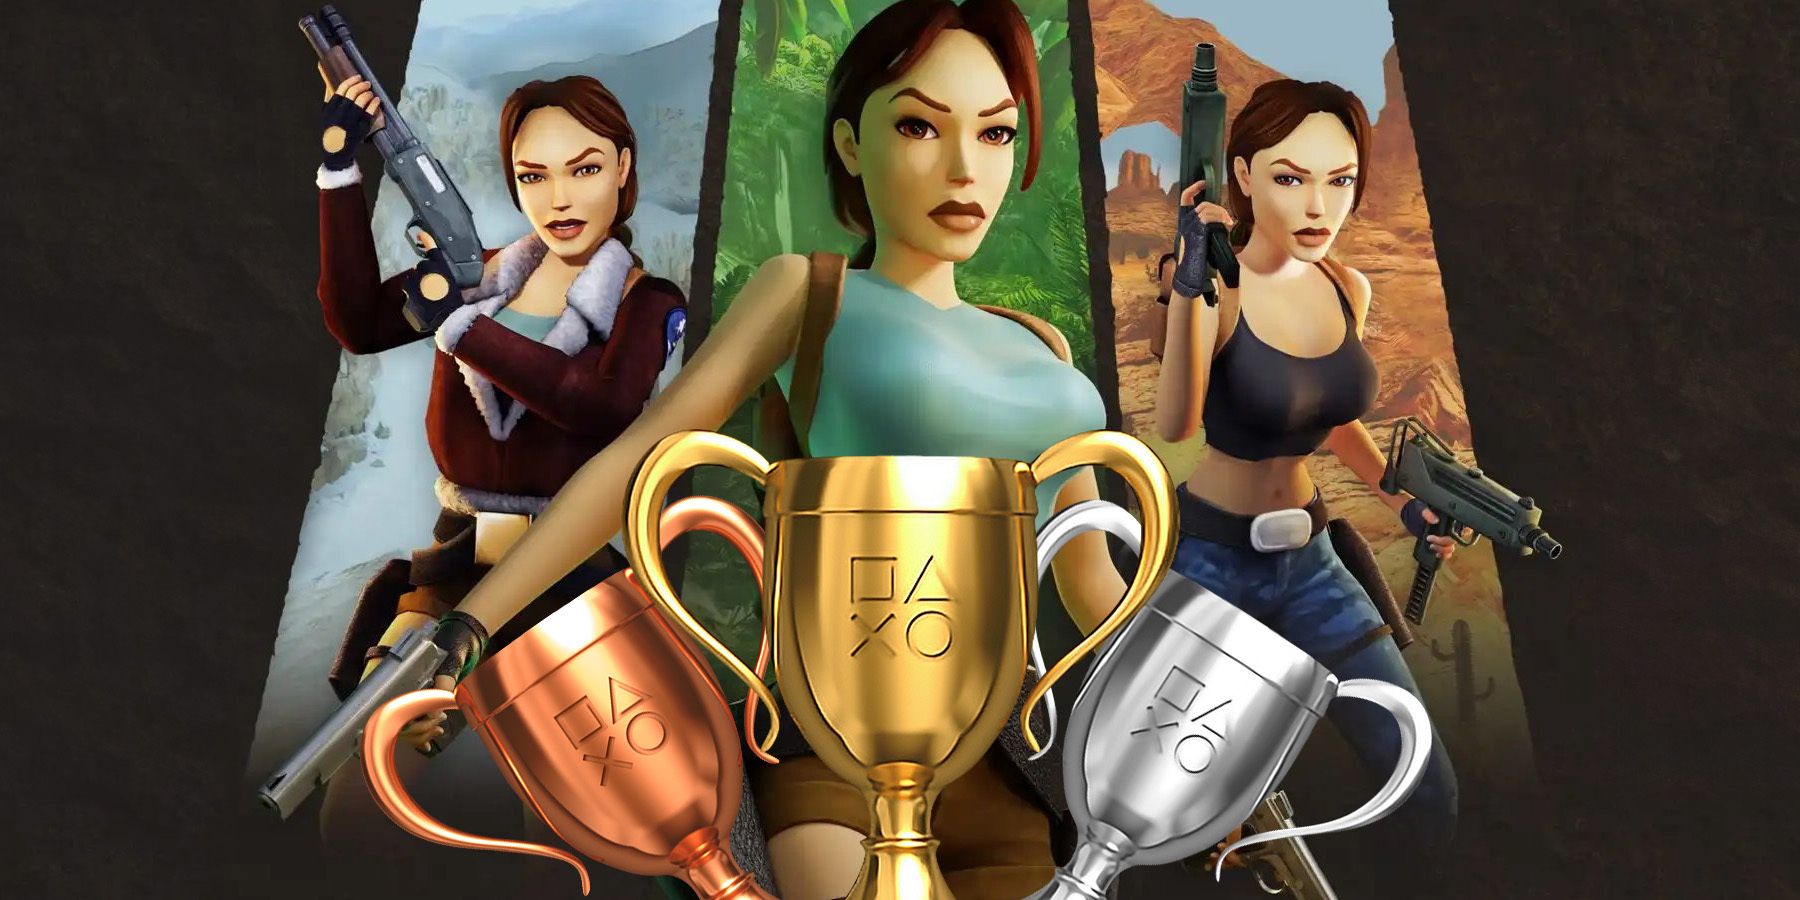 Tomb Raider Remastered Collection Includes Content Warning